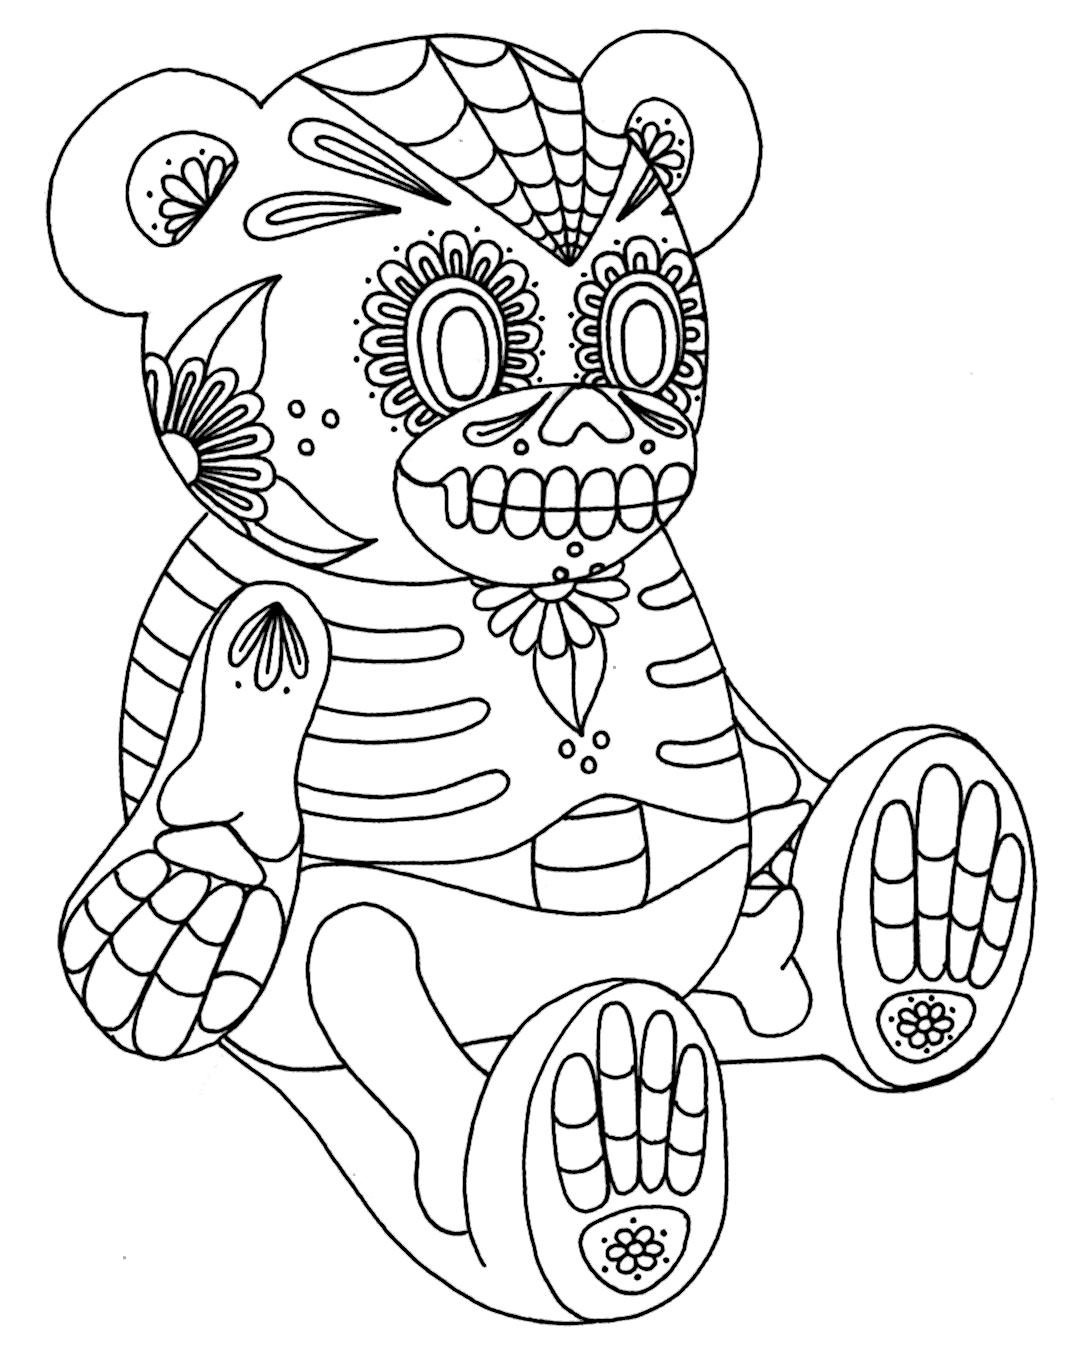 sugar-skull-coloring-pages-best-coloring-pages-for-kids